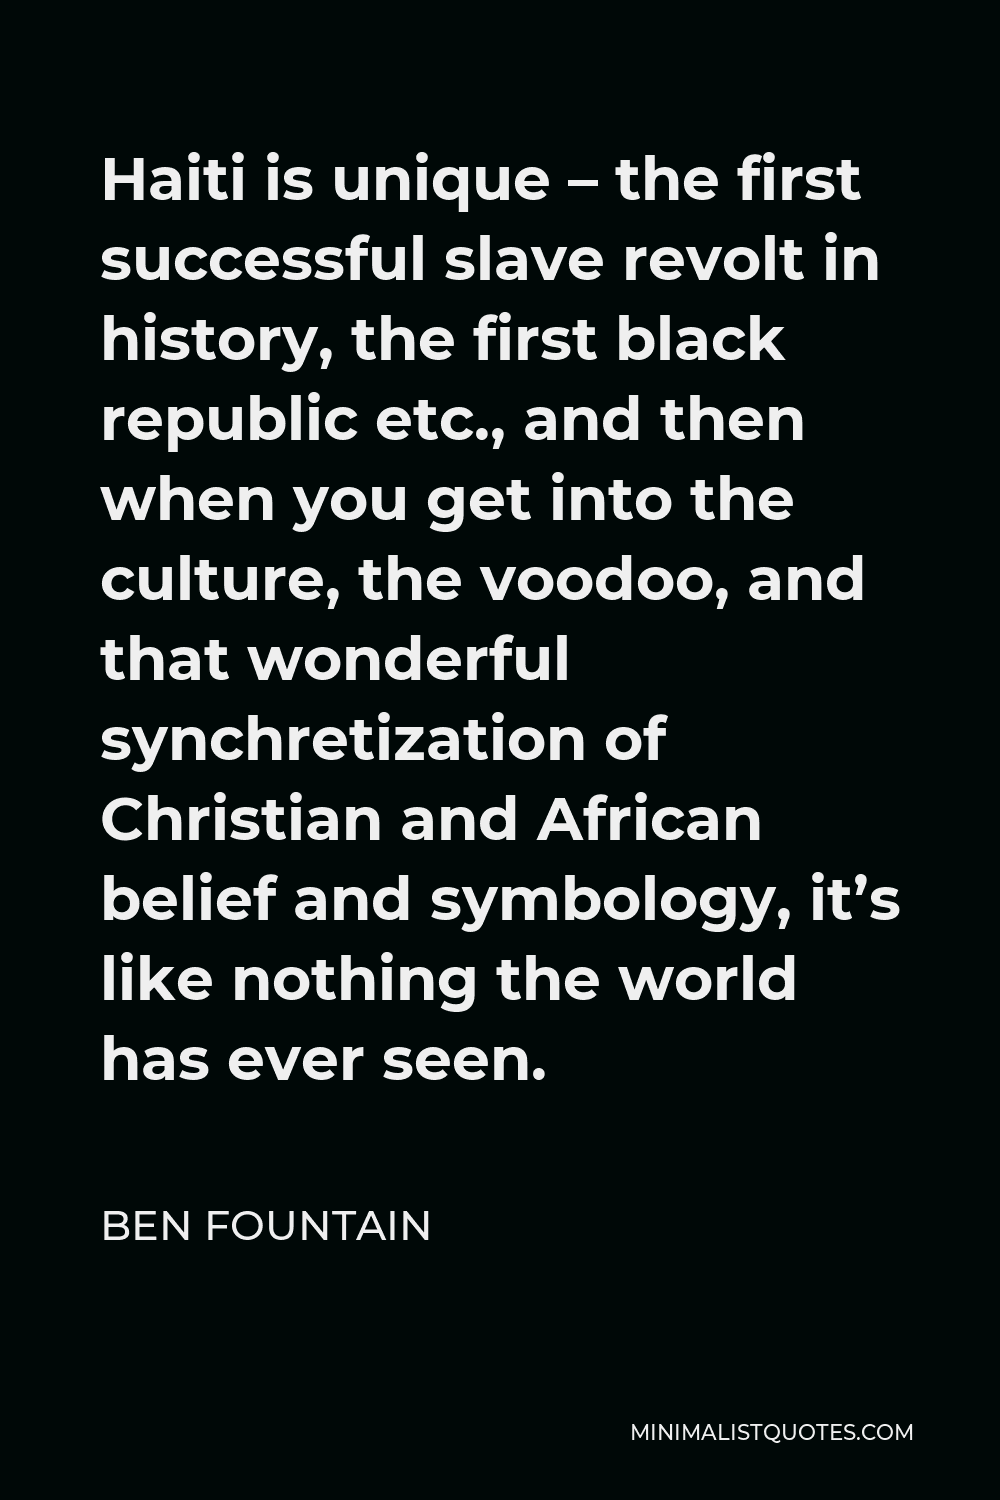 Ben Fountain Quote - Haiti is unique – the first successful slave revolt in history, the first black republic etc., and then when you get into the culture, the voodoo, and that wonderful synchretization of Christian and African belief and symbology, it’s like nothing the world has ever seen.